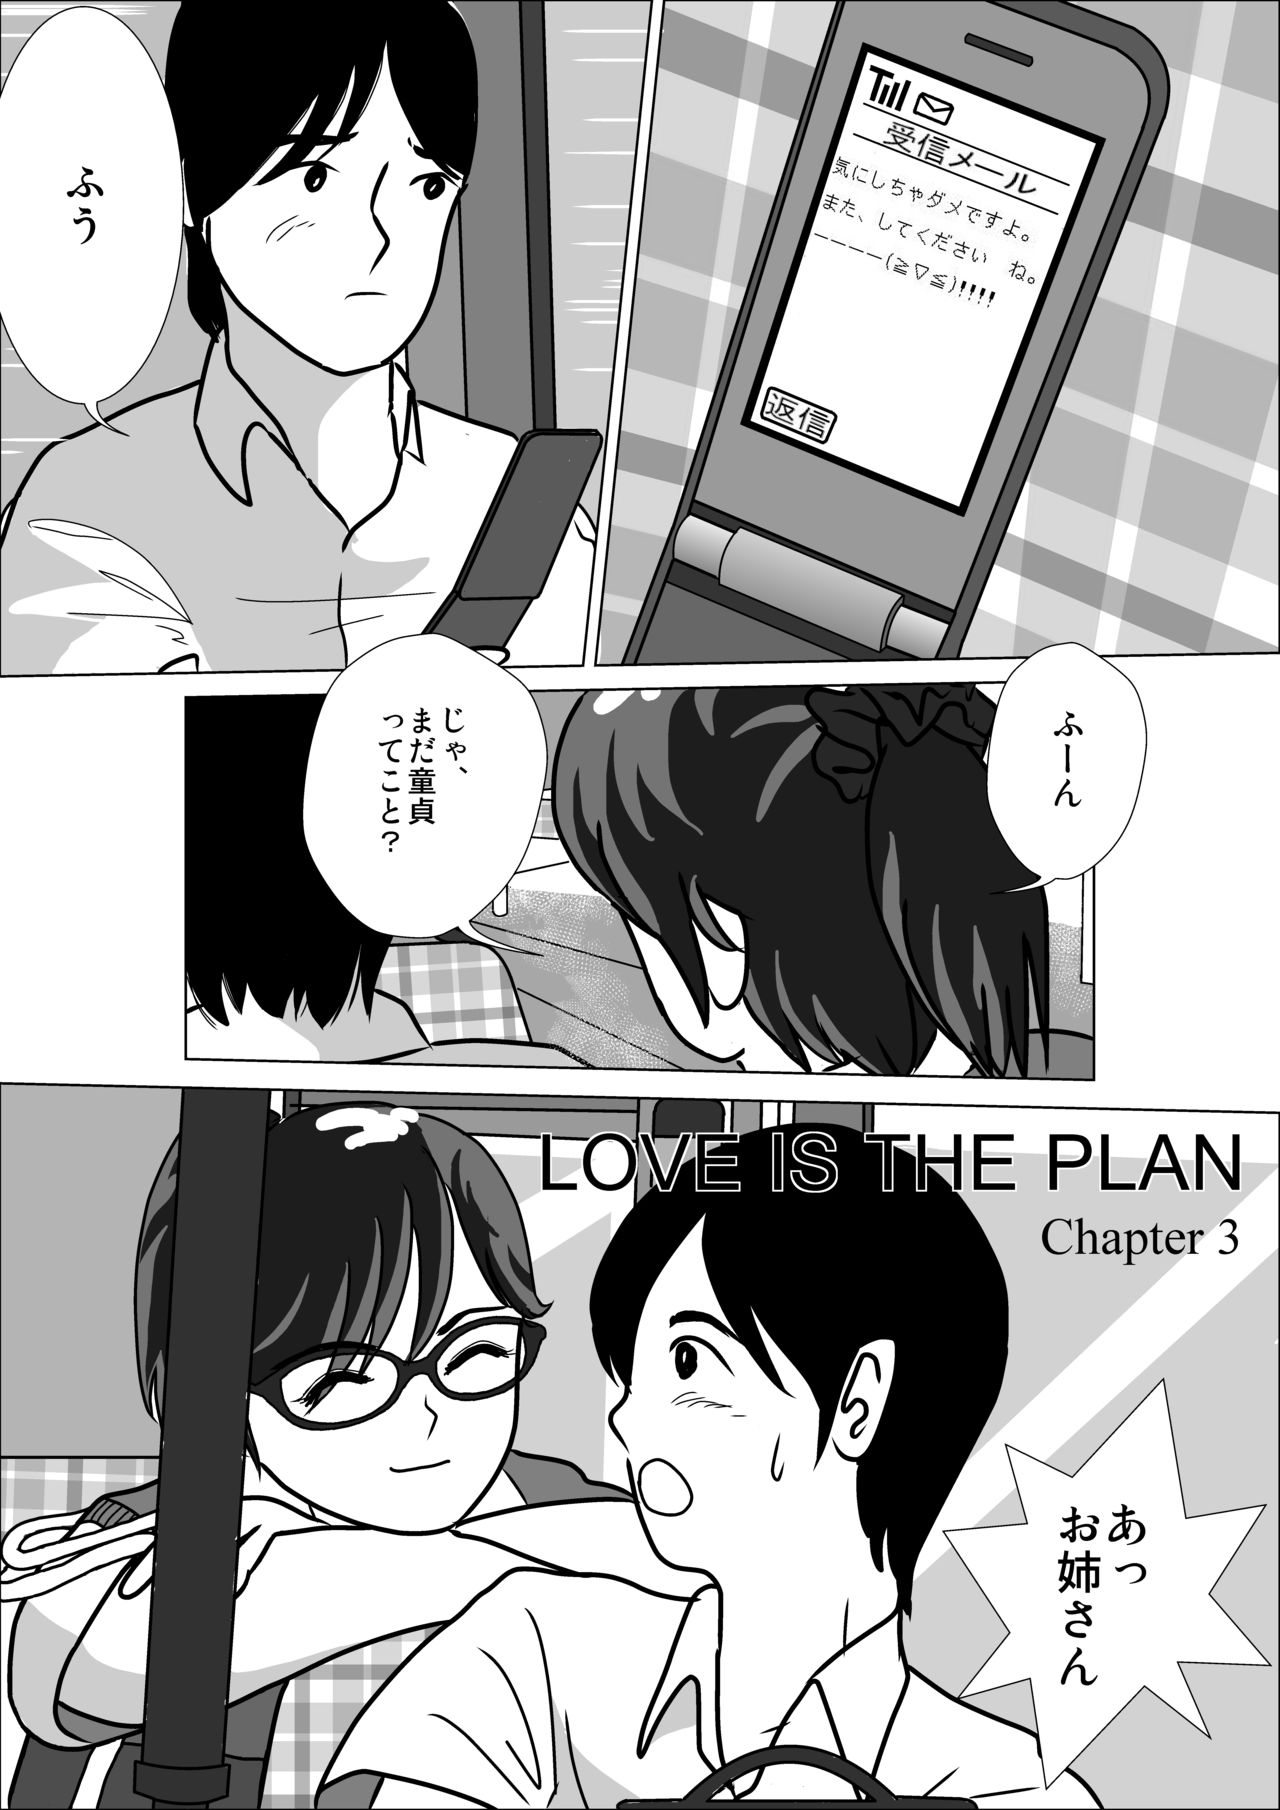 [I/H/R] LOVE IS THE PLAN Chapter 3 page 6 full